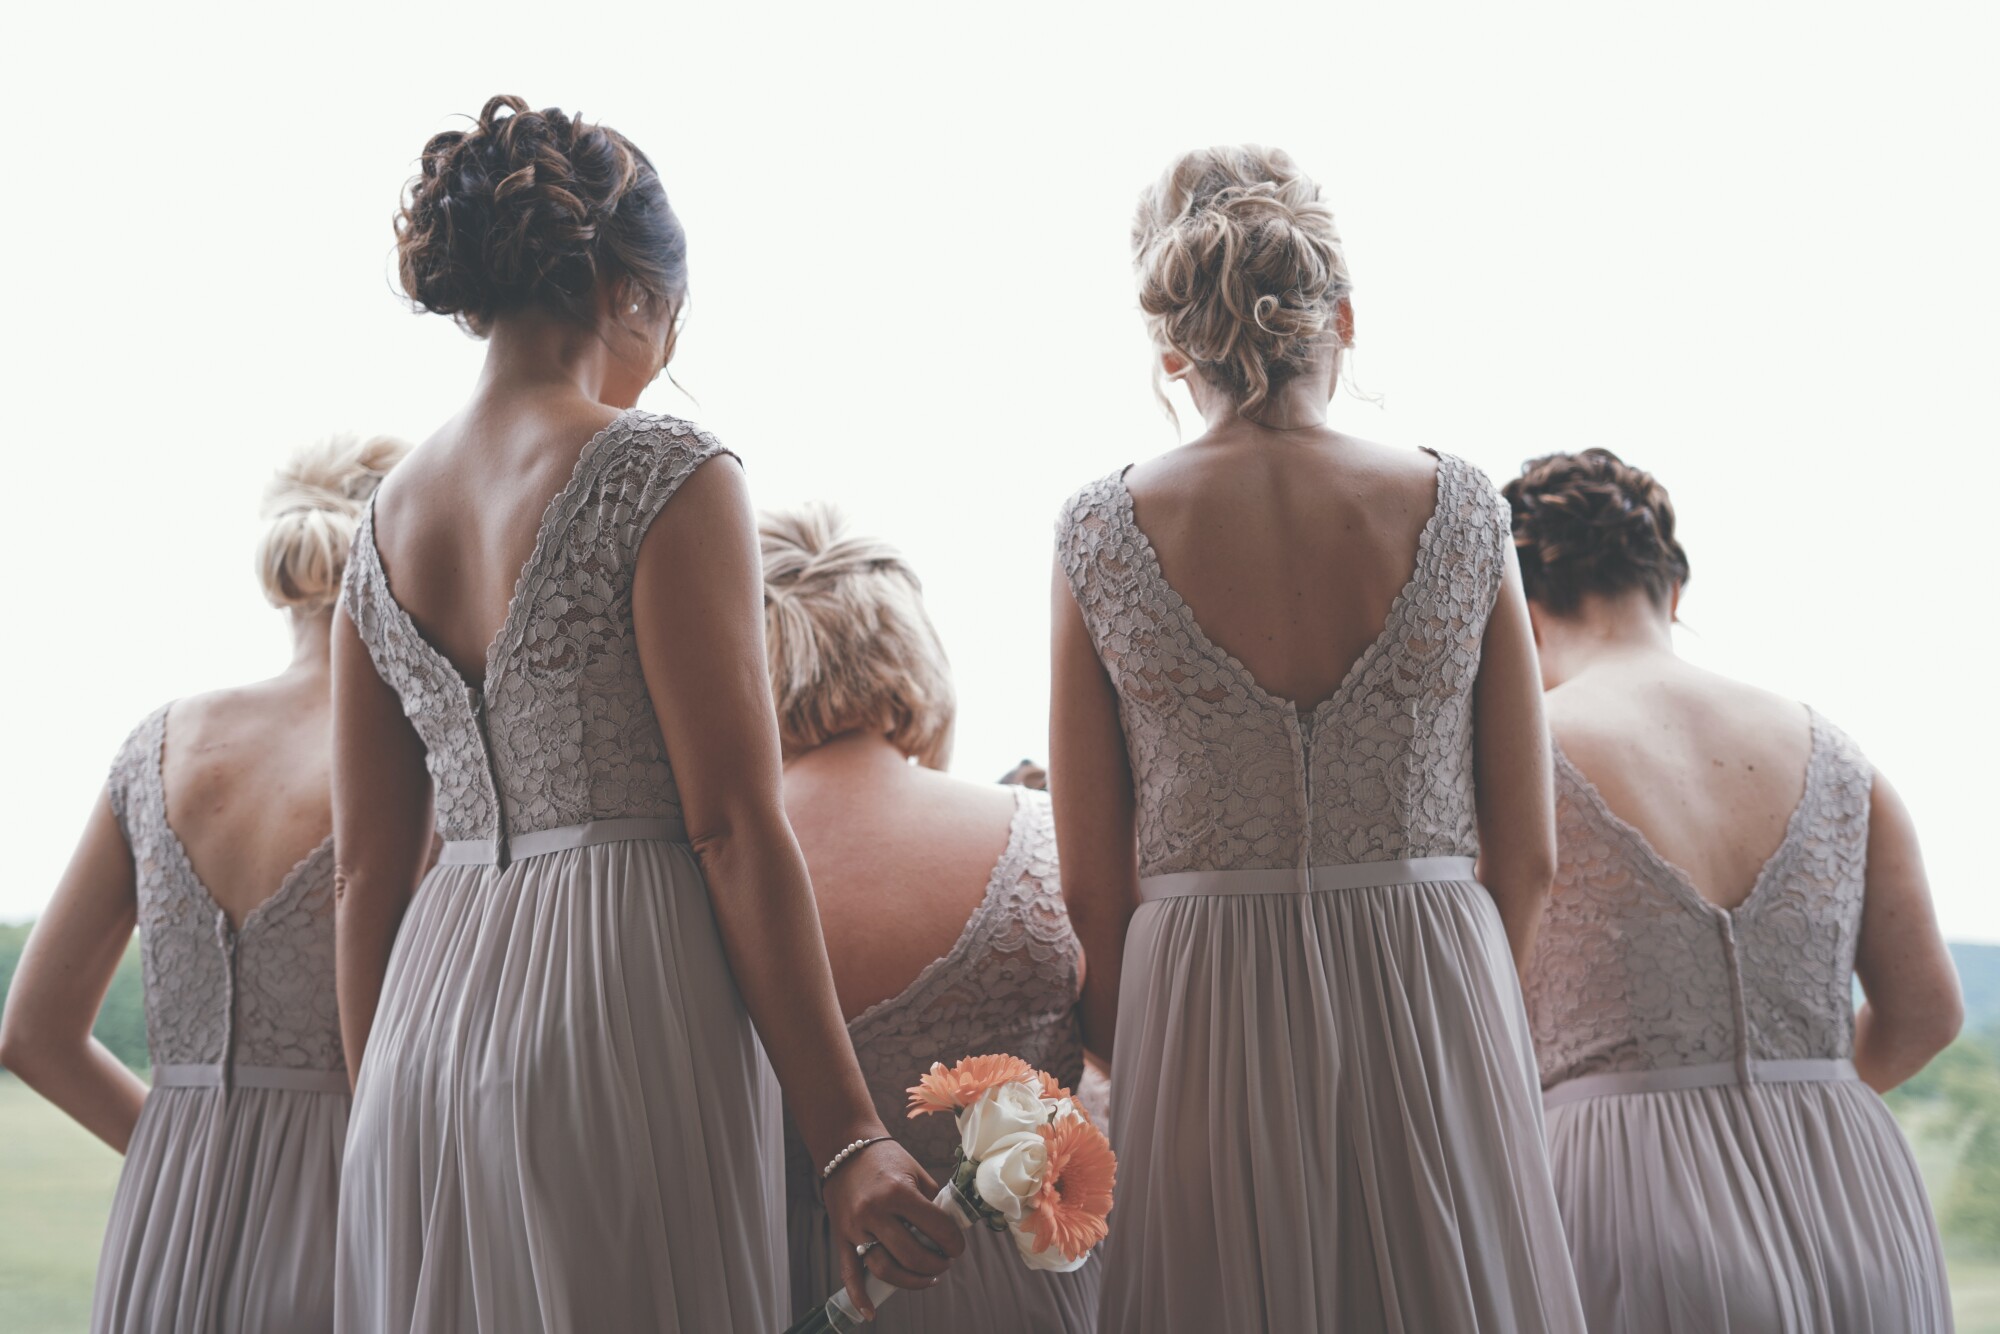 Get Inspired: Top 5 Bridesmaid Hair Half-up Inspo